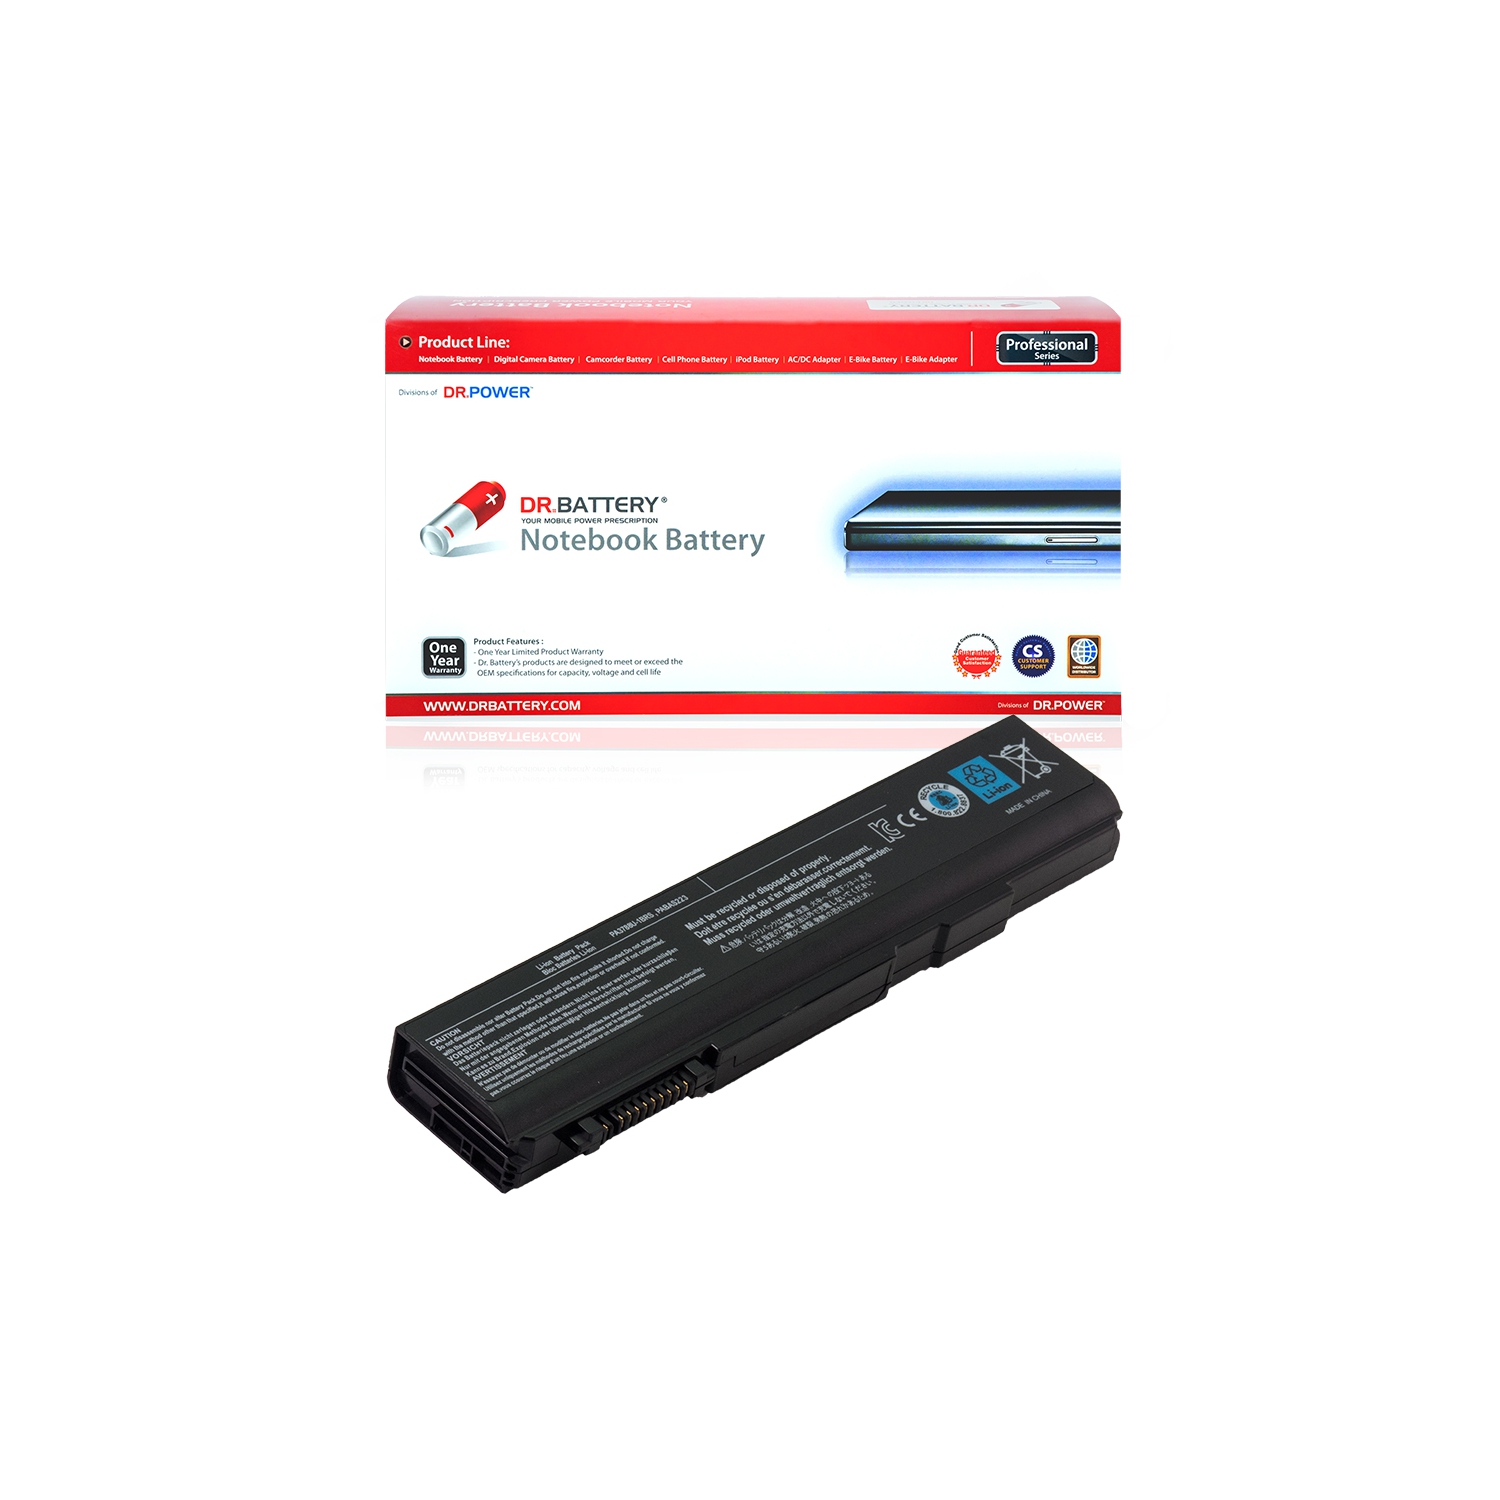 DR. BATTERY - Replacement for Toshiba Satellite Pro S500-0EE / S750 / PABAS221 / PABAS222 / PABAS223 / PA3786U-1BRS